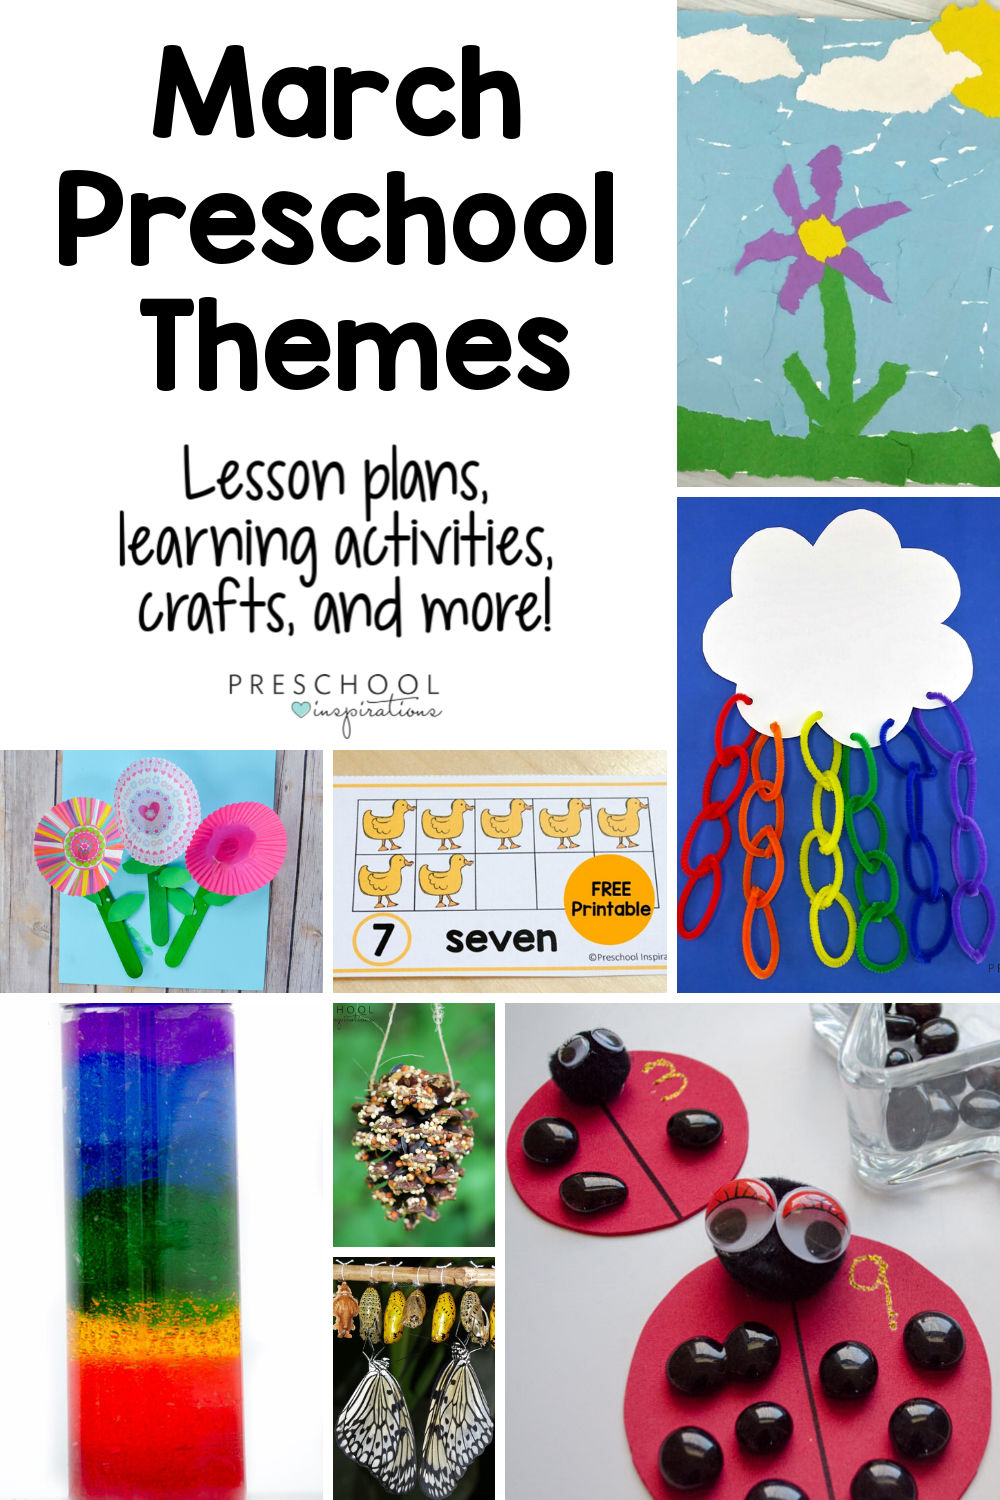 Use themes to make teaching preschool a breeze this March! Find lesson plans and other activities for great teaching themes such as bugs and butterflies, flowers, garden, worms, spring, and more! 